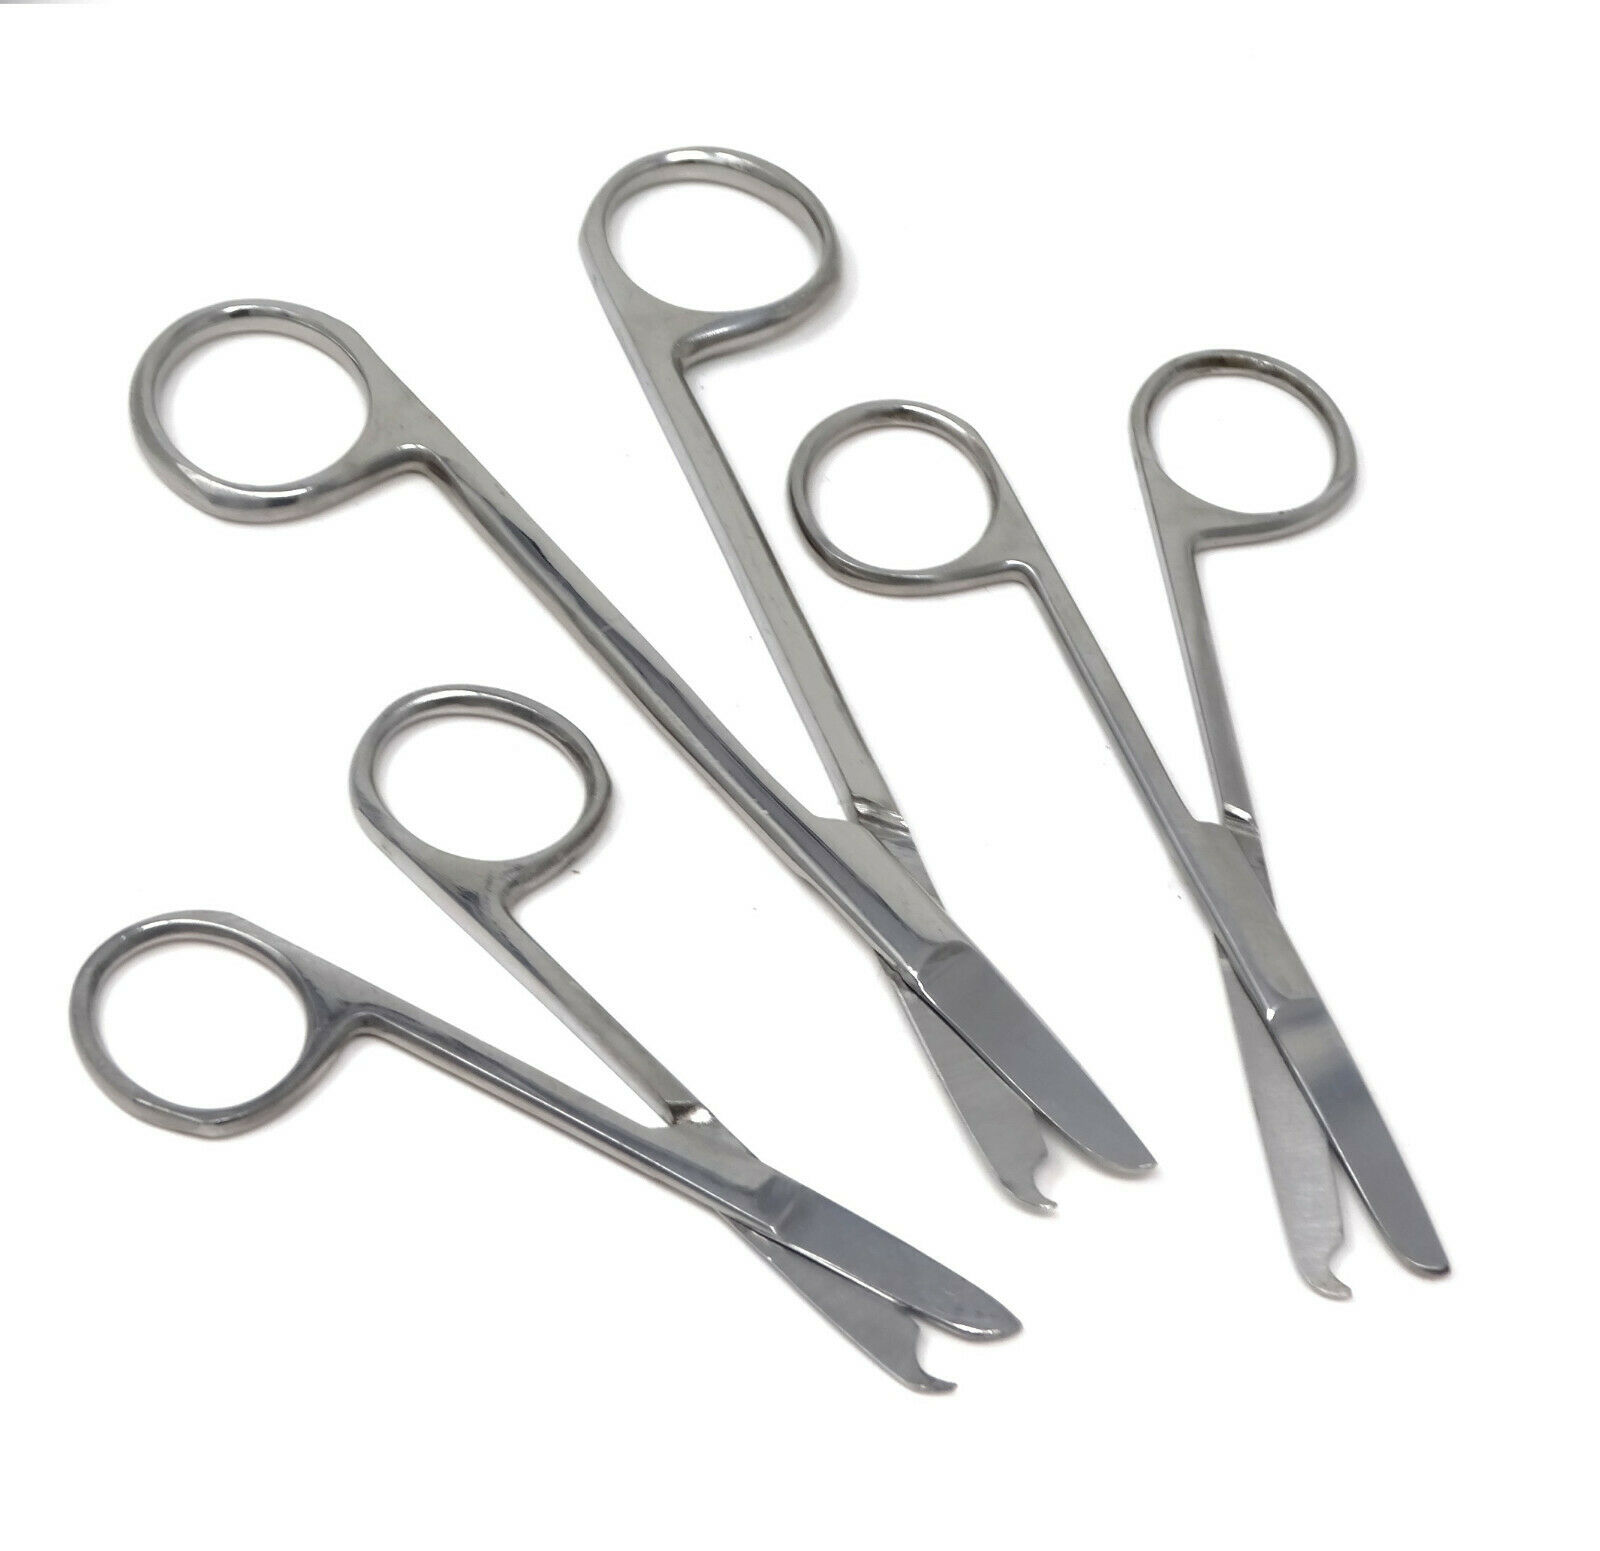 3 Assorted Stainless Steel Embroidery Supplies Stitch Scissors 3.5